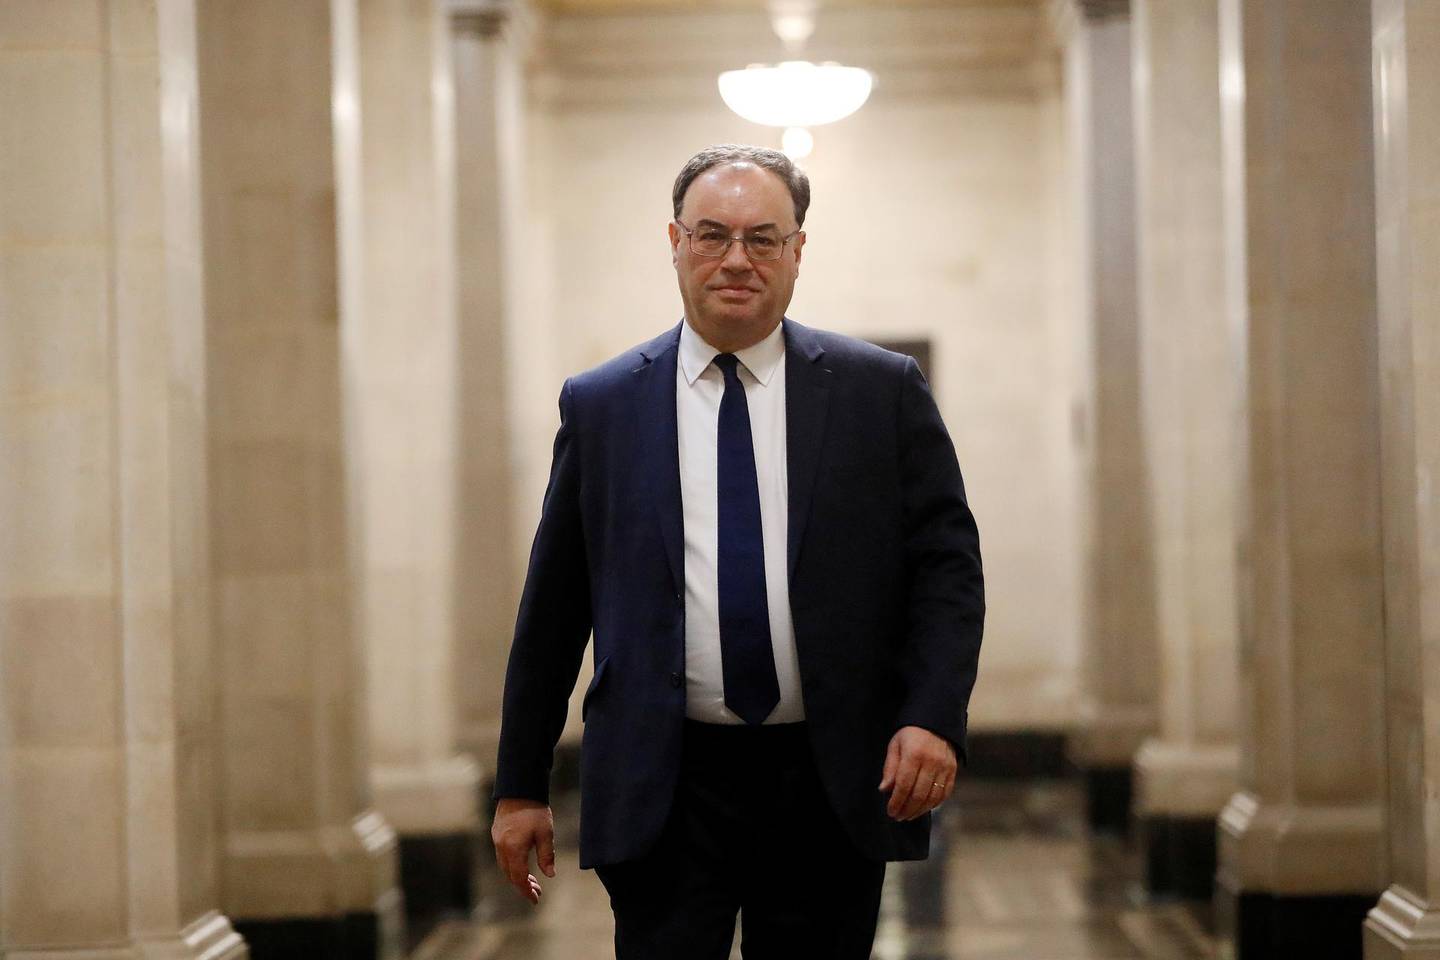 FILE PHOTO: Bank of England Governor Andrew Bailey poses for a photograph on the first day of his new role at the Central Bank in London, Britain March 16, 2020. Tolga Akmen/Pool via REUTERS/File Photo